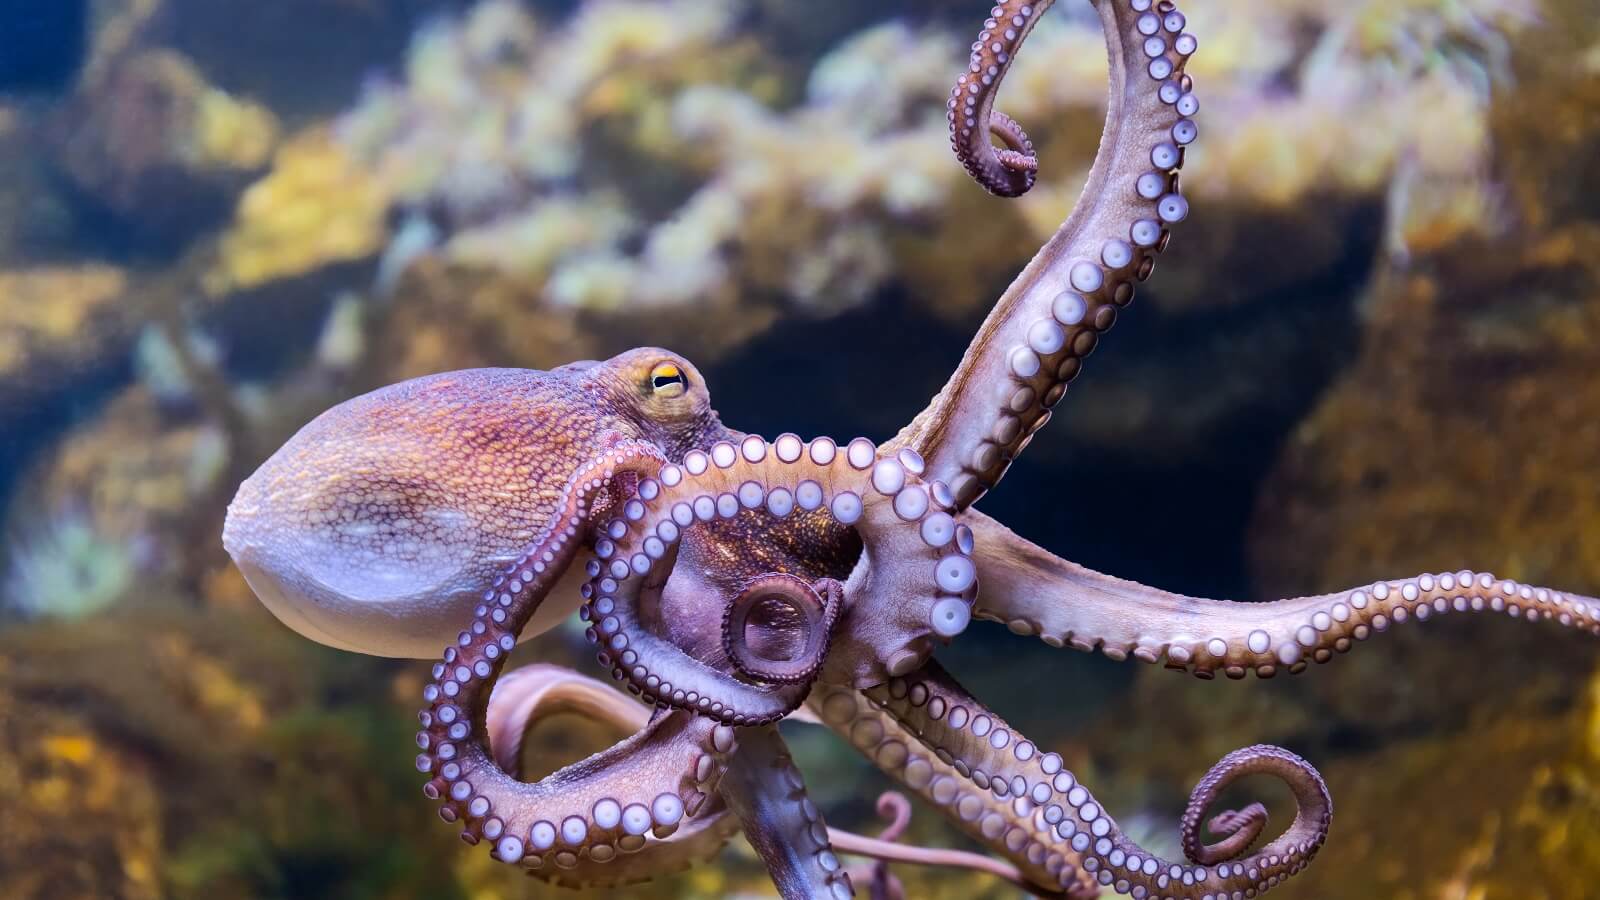 octopus swimming in water with coral